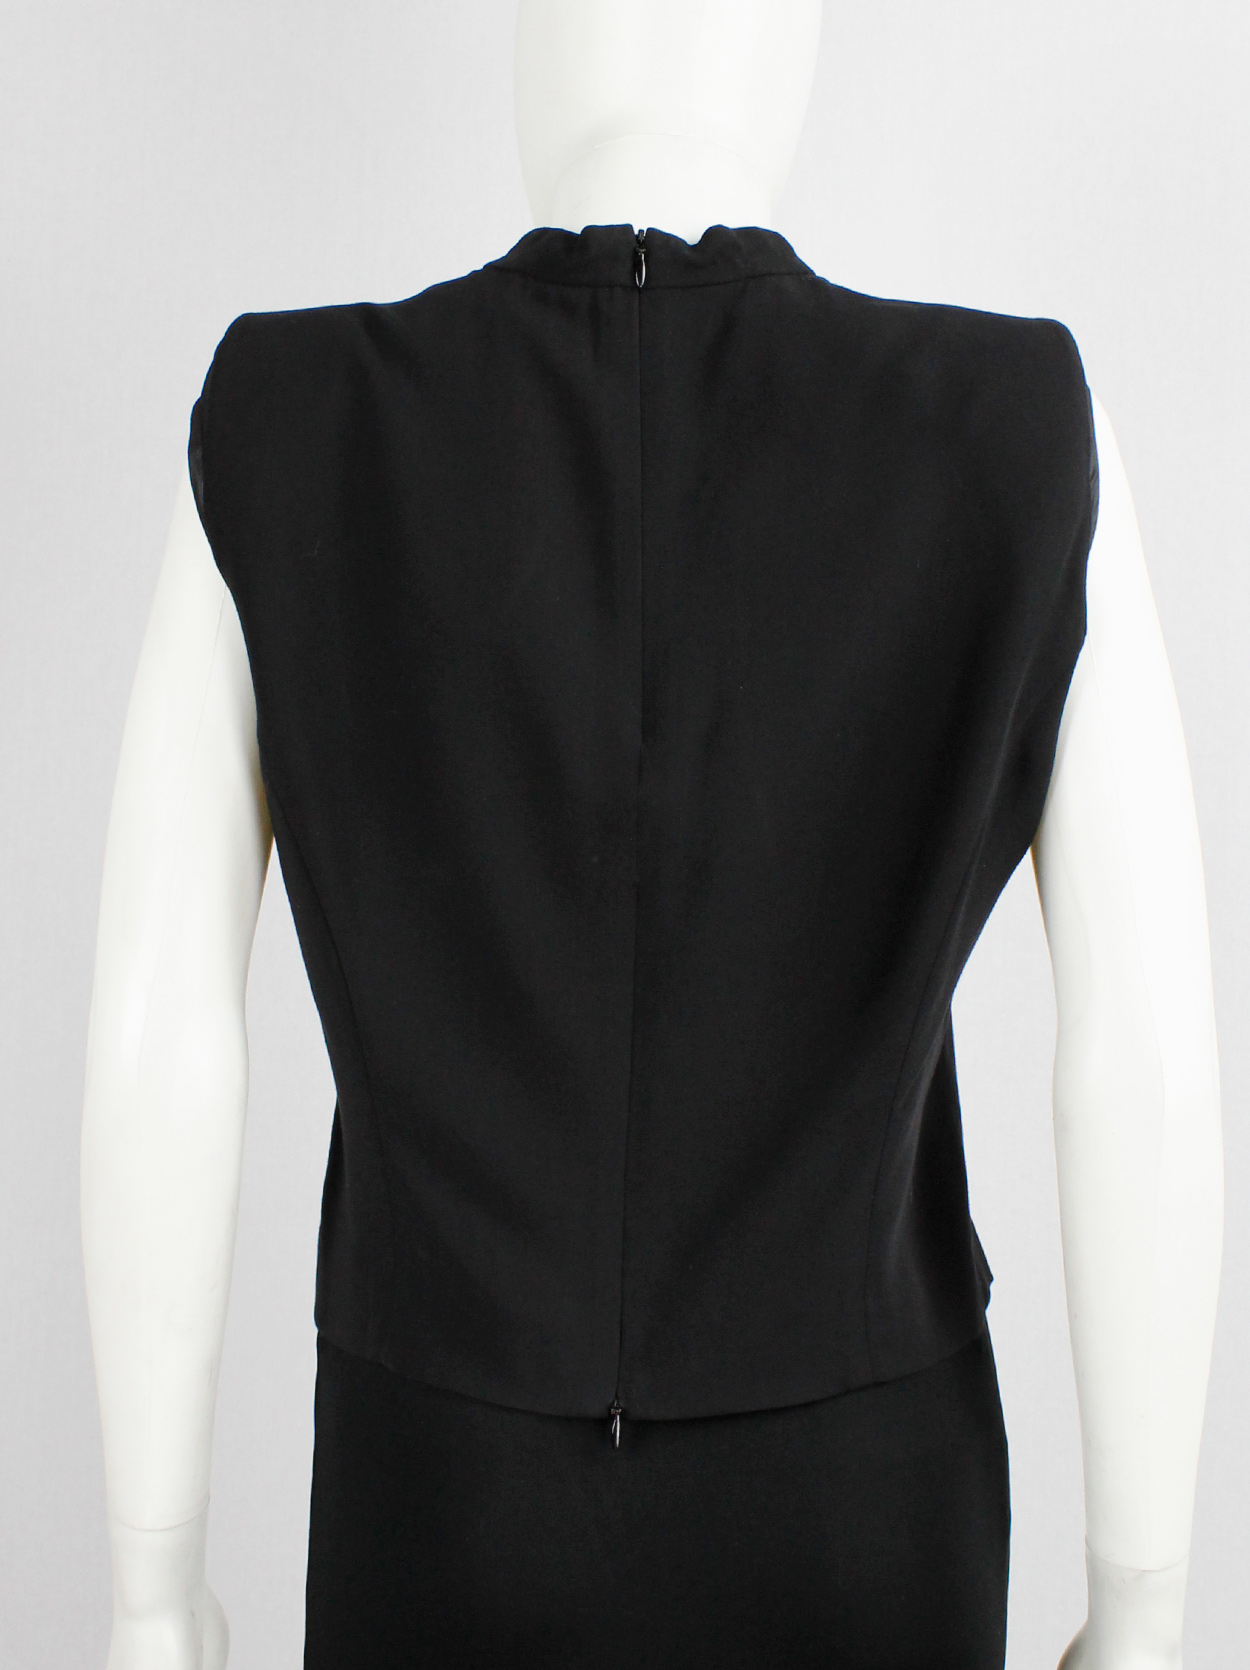 Ann Demeulemeester black top with padded shoulders and mock turtleneck ...